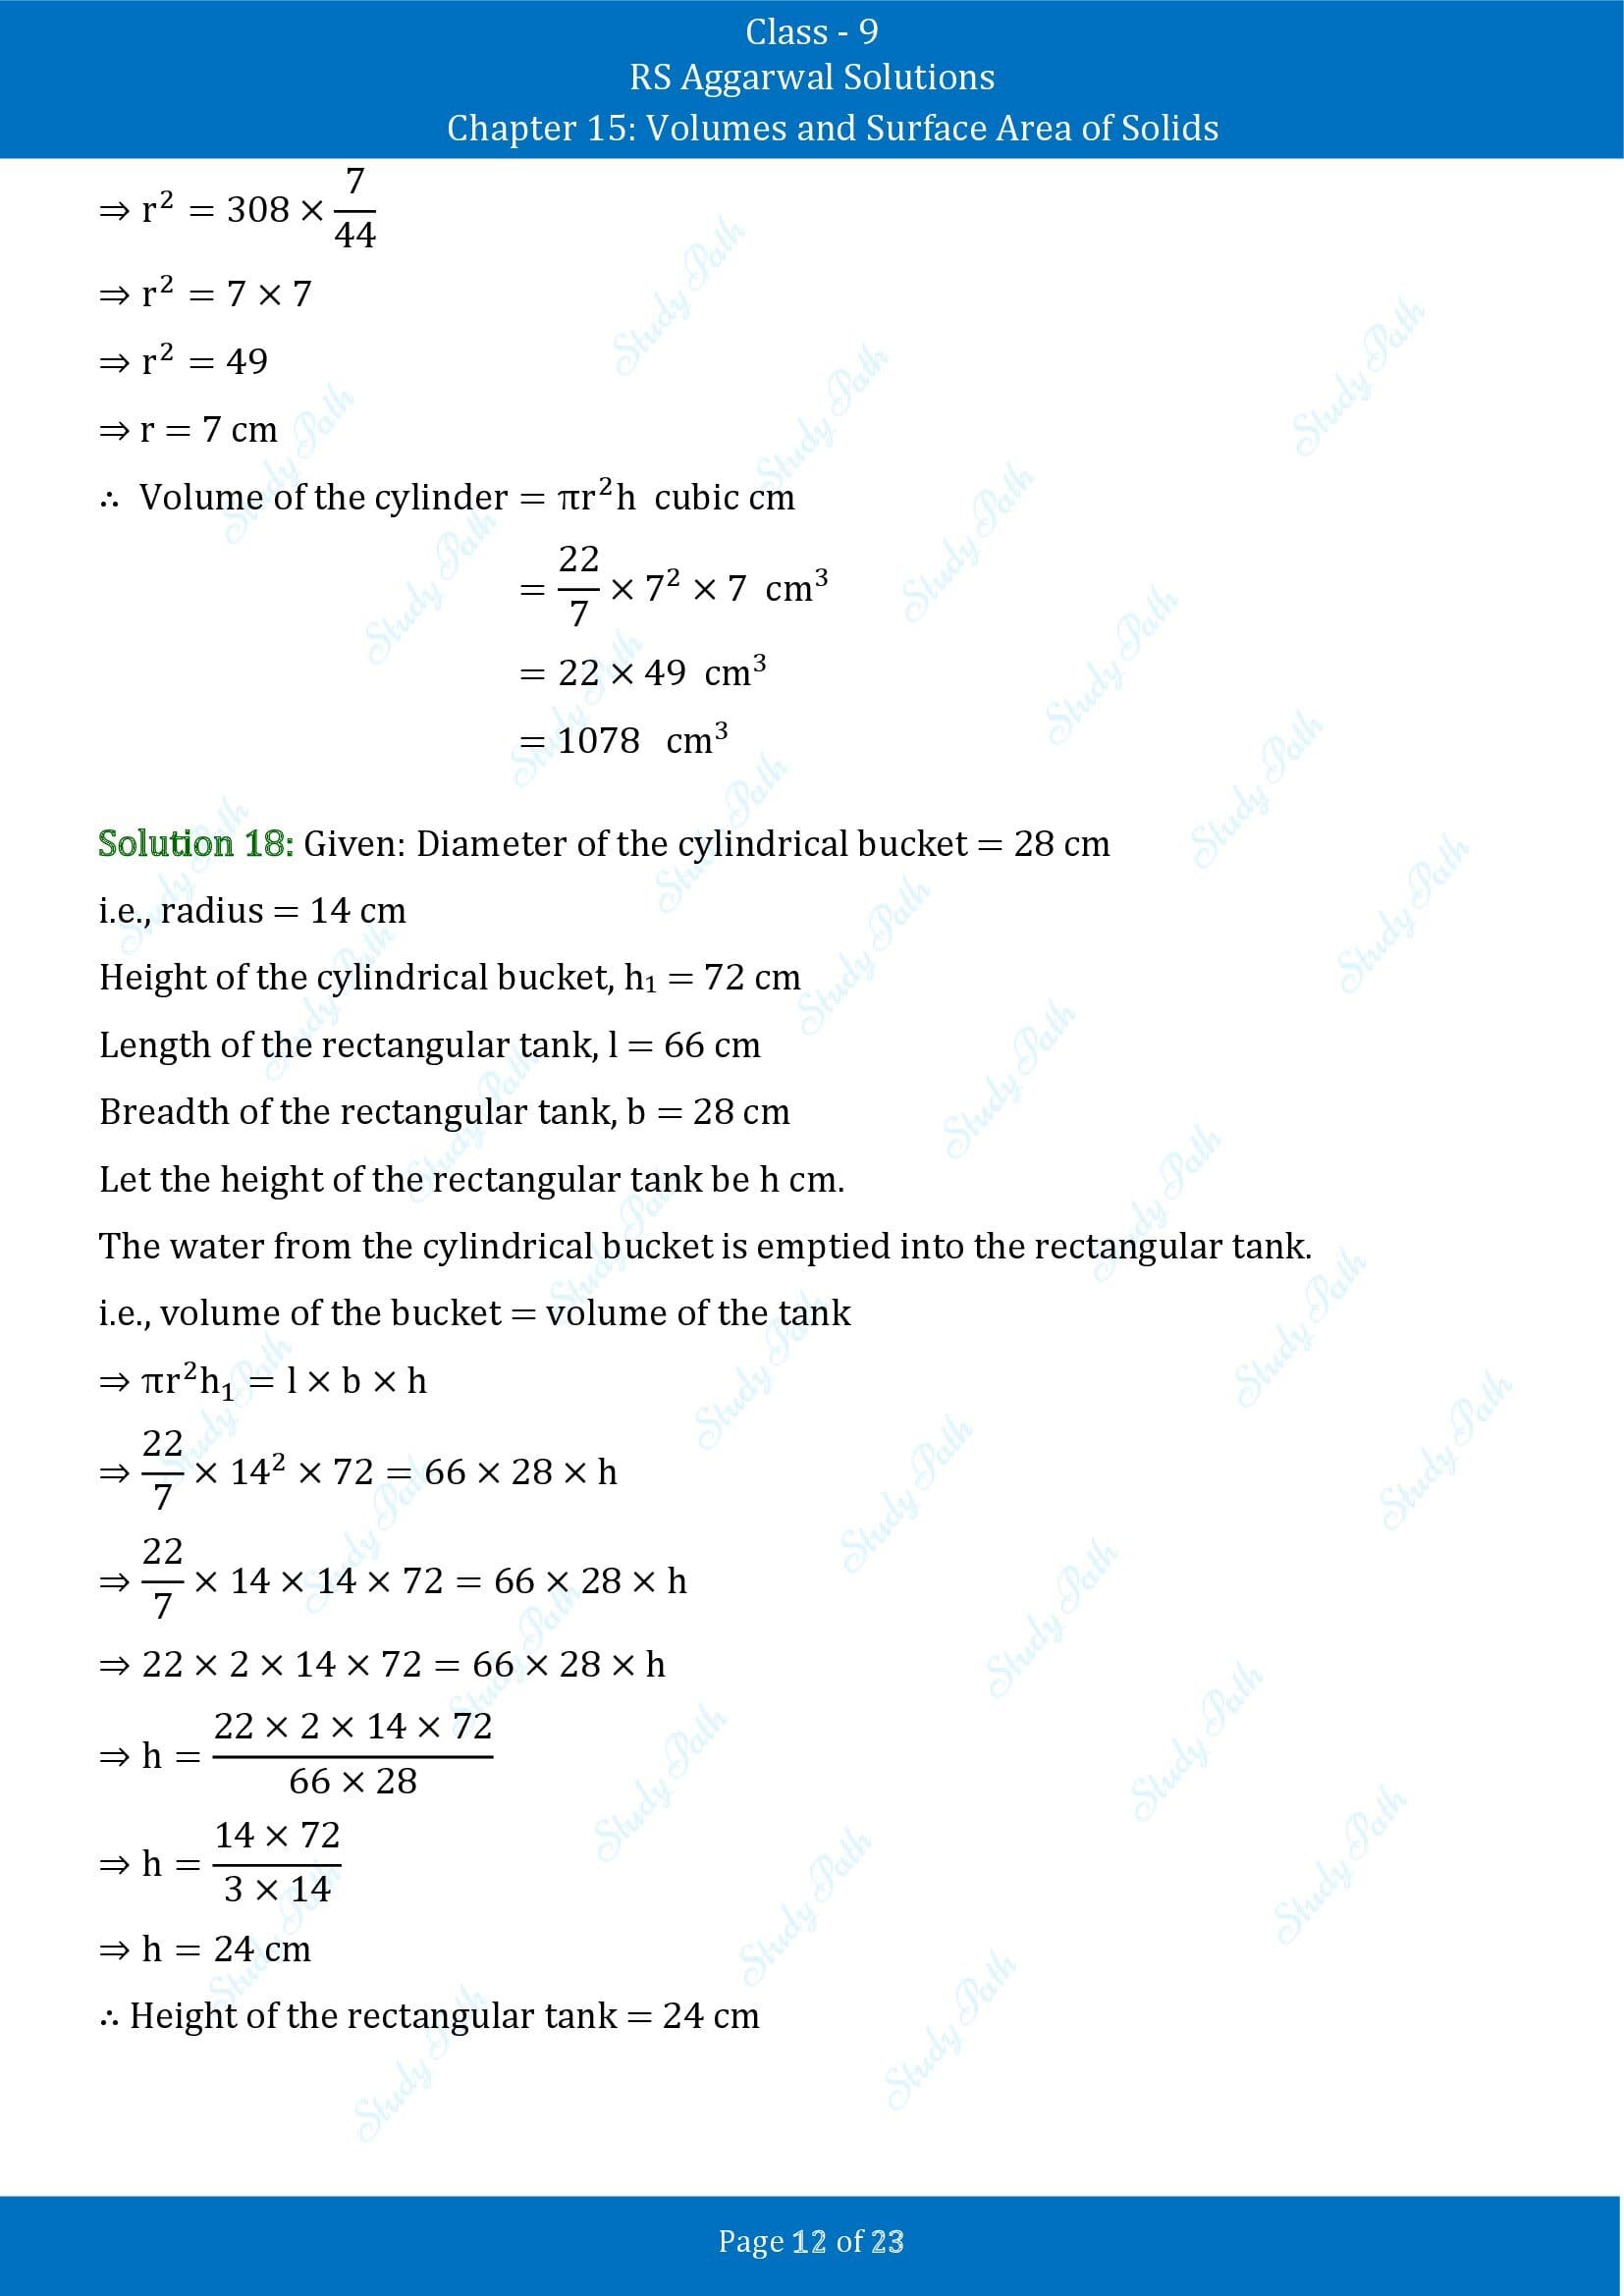 RS Aggarwal Solutions Class 9 Chapter 15 Volumes and Surface Area of Solids Exercise 15B 00012